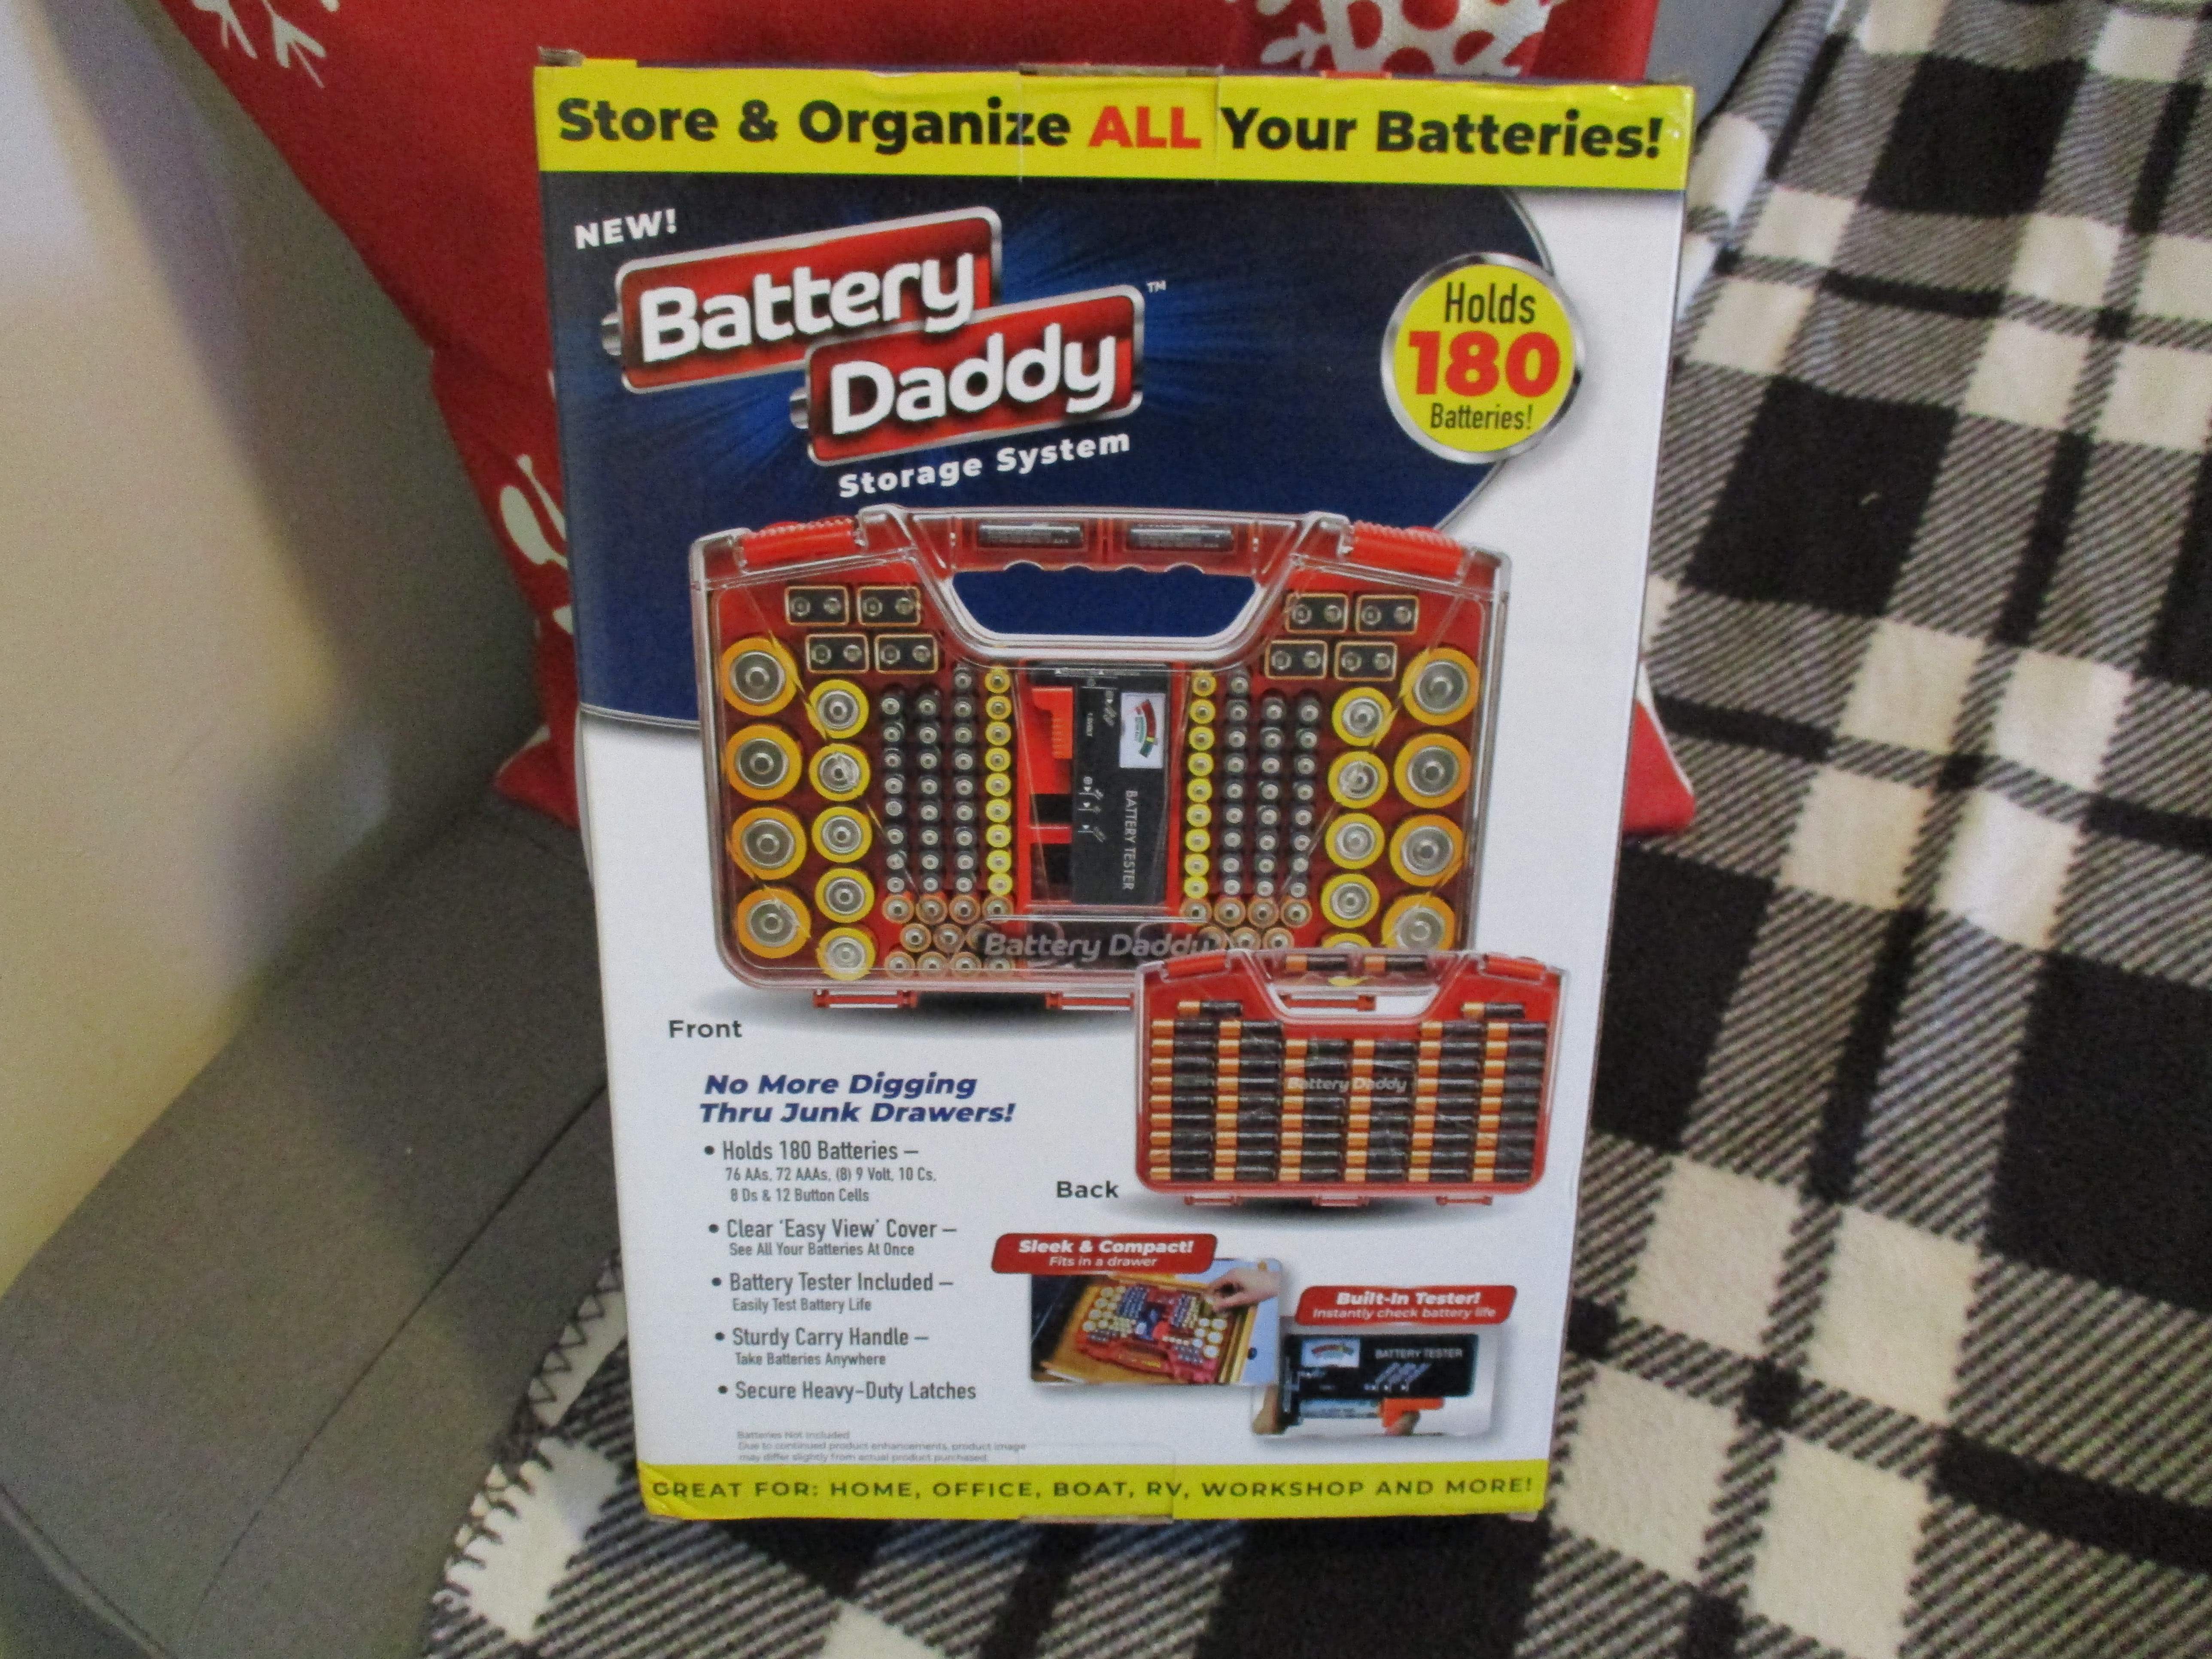 Missy's Product Reviews : Battery Daddy Holiday Gift Guide 2022